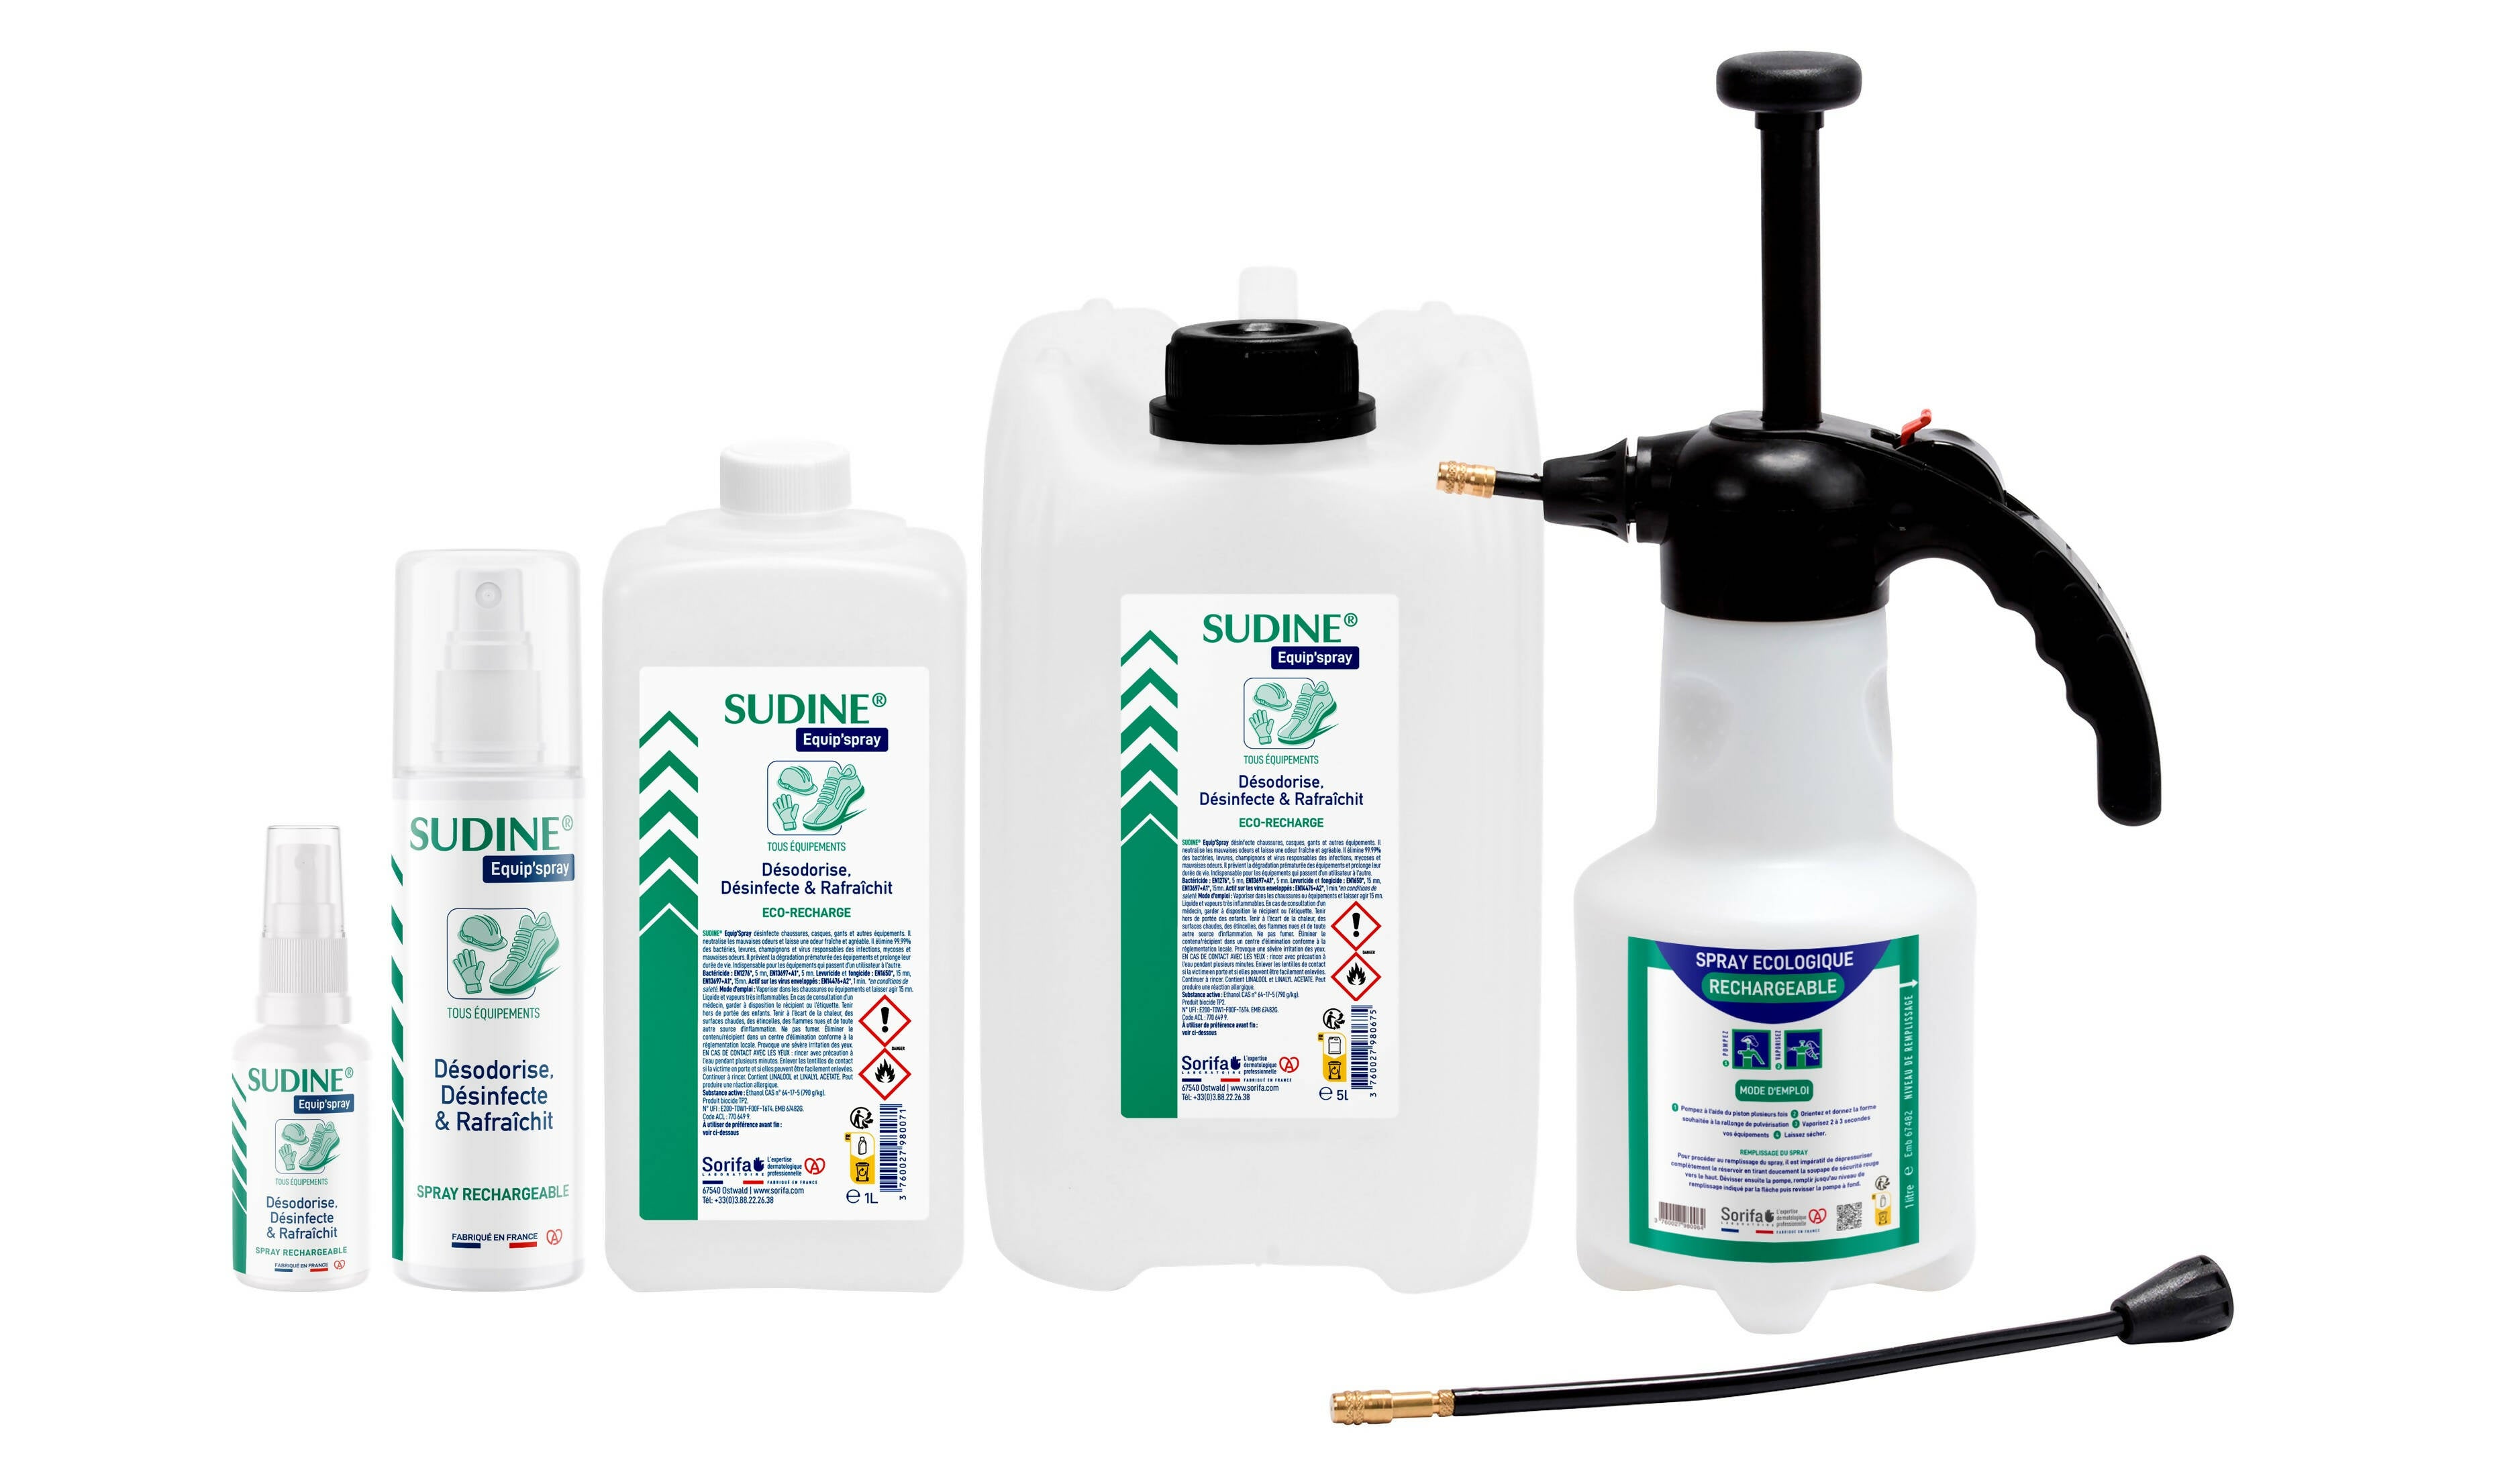 SORIFA - Sudine Equip'spray - Deodorizes, disinfects, refreshes - Shoes, helmets, gloves, equipment - 1L refill for SUDINE Equip'spray 50 and 125 ml or for the 1L SORIFA Spray